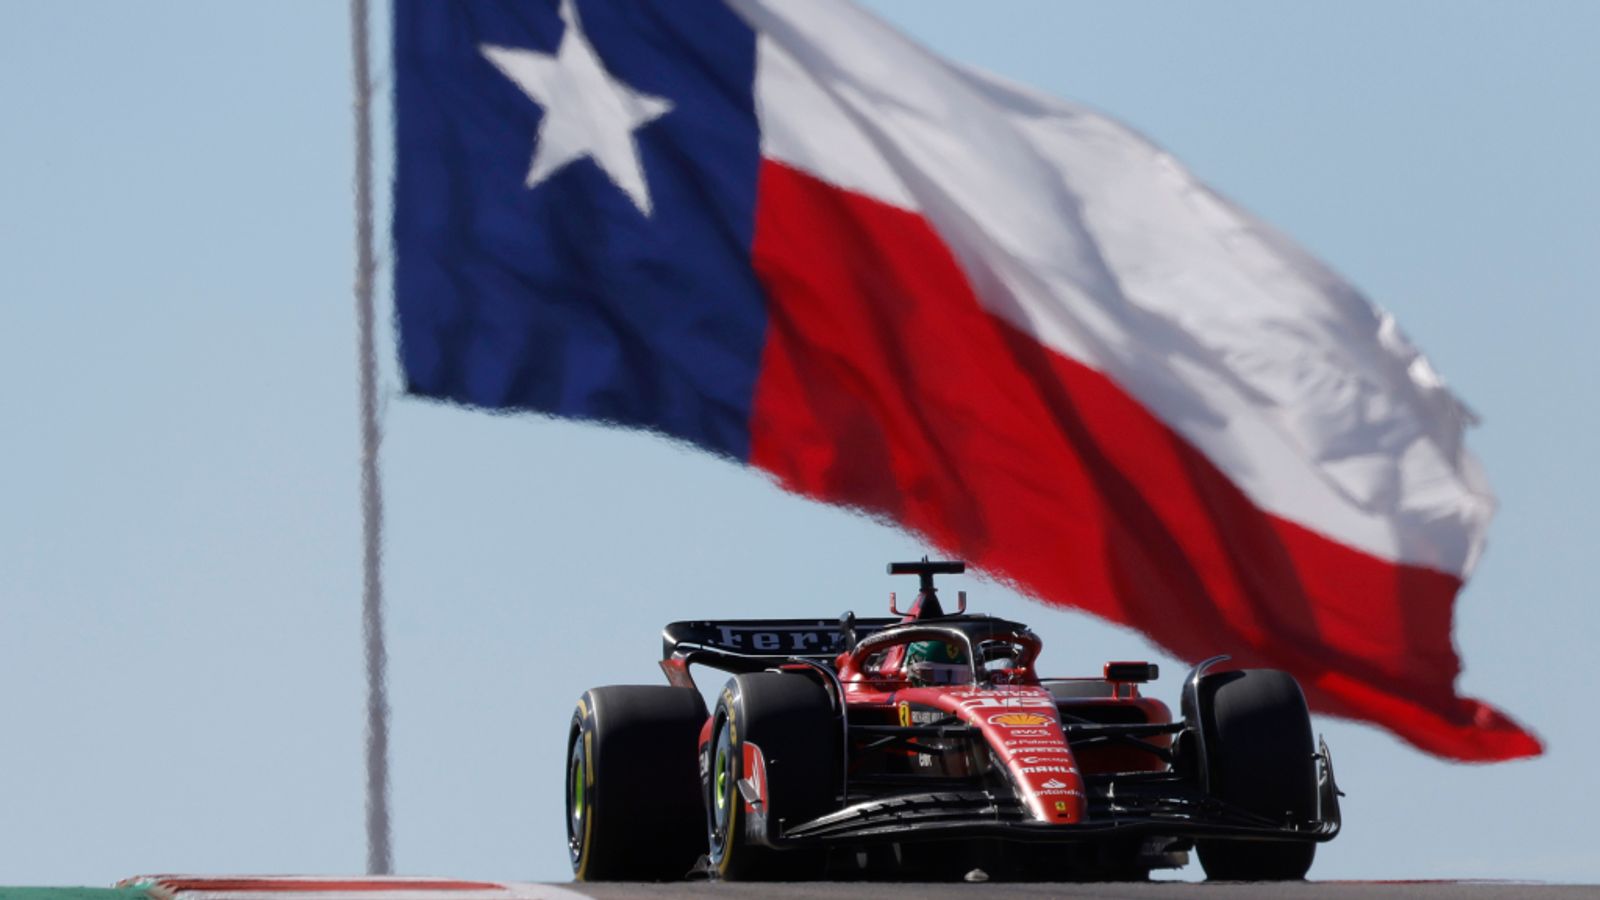 Brundle on US GP: Disqualifications show Sprint format needs tweaking